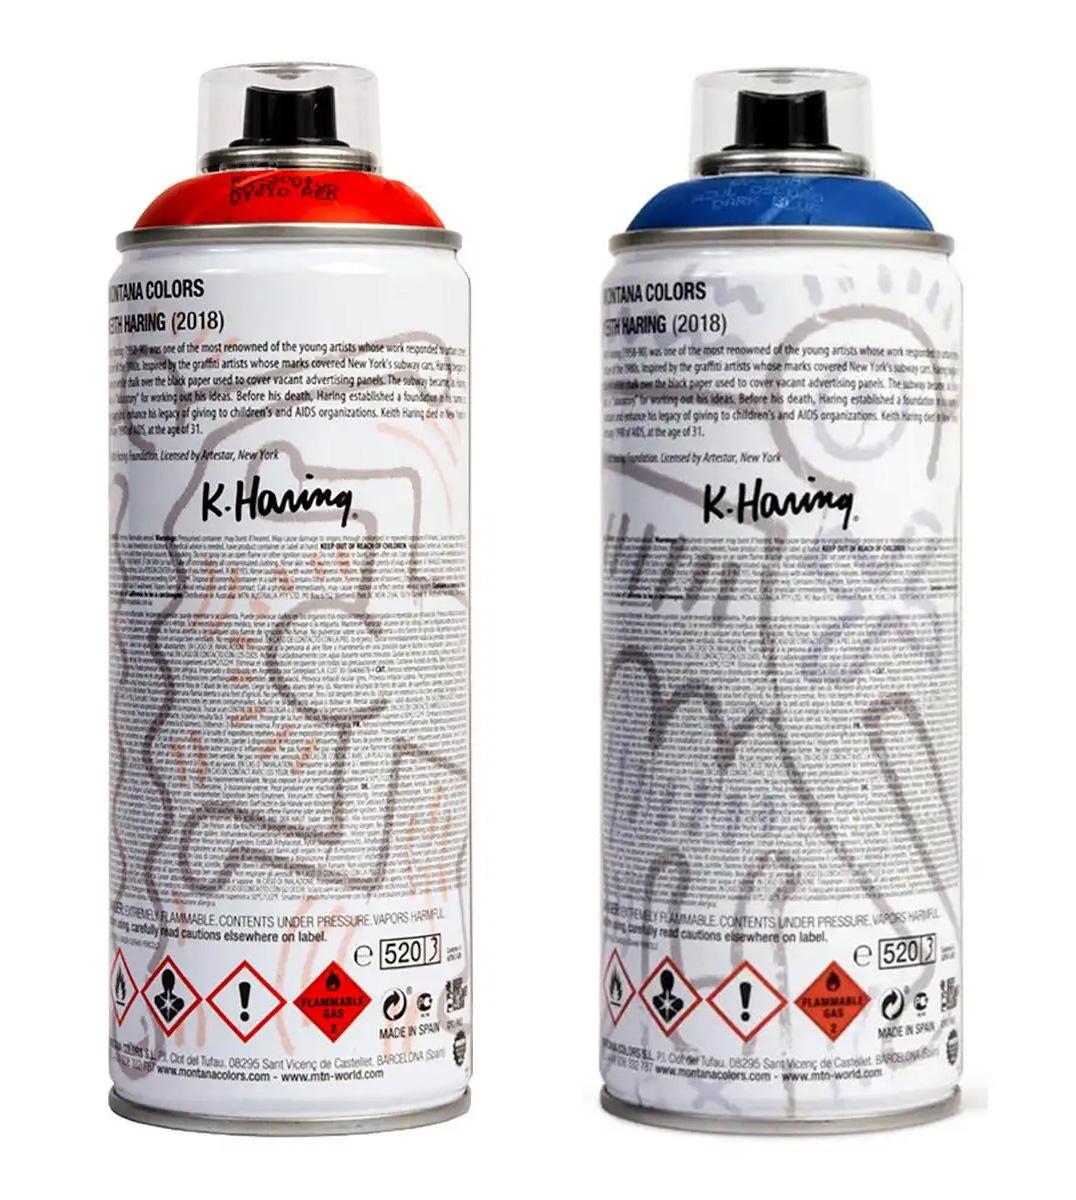 Limited edition Keith Haring spray paint can (set of 2) - Pop Art Print by (after) Keith Haring